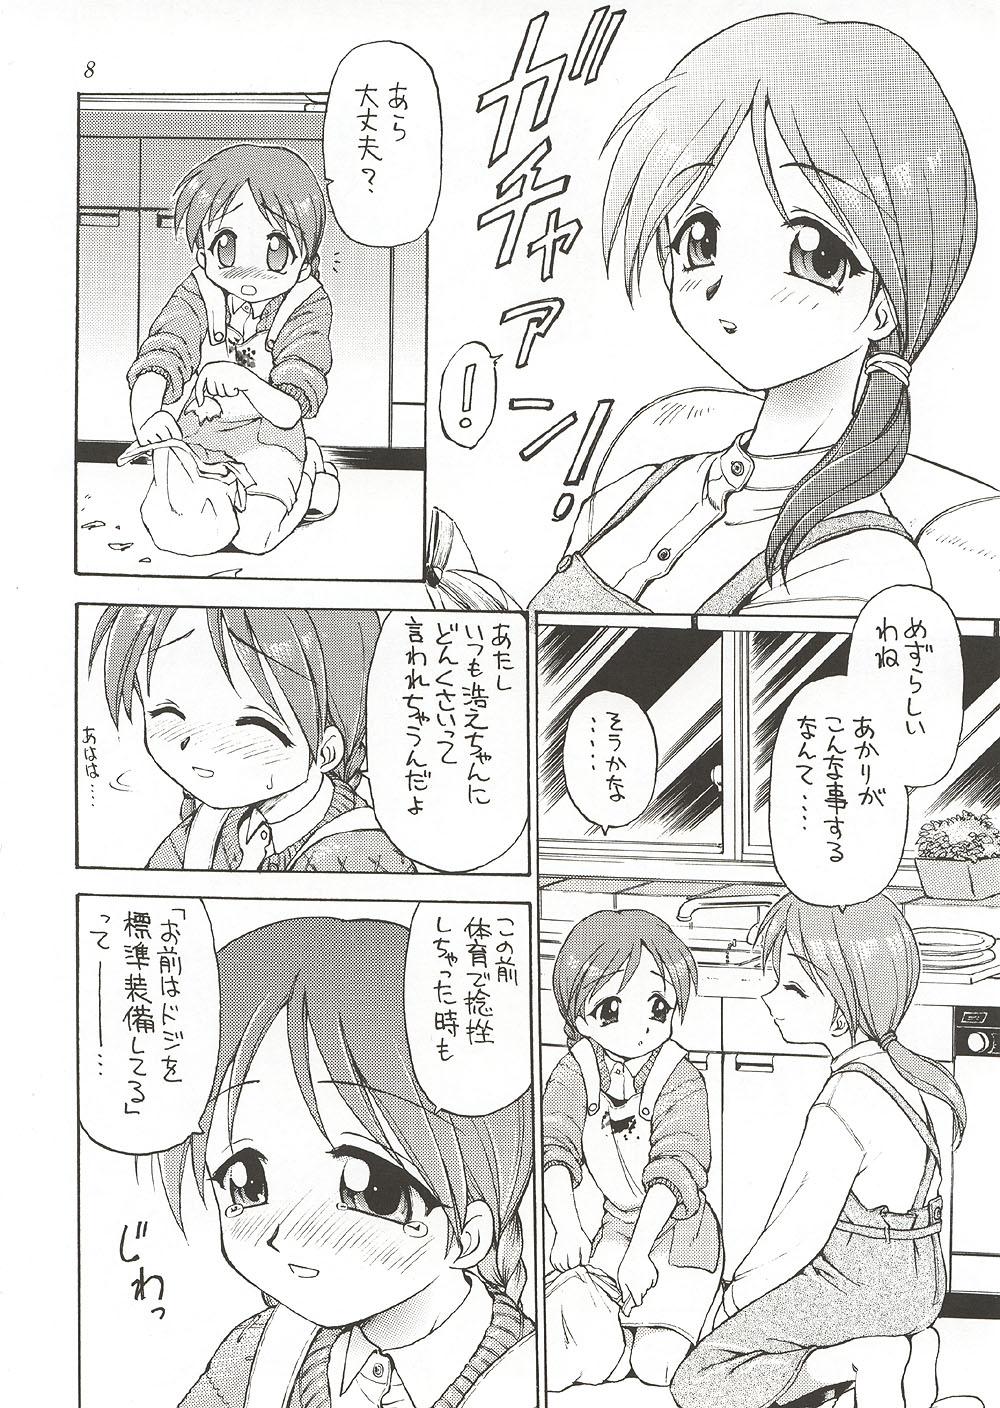 Lolicon Eternity - To heart Bang - Page 7